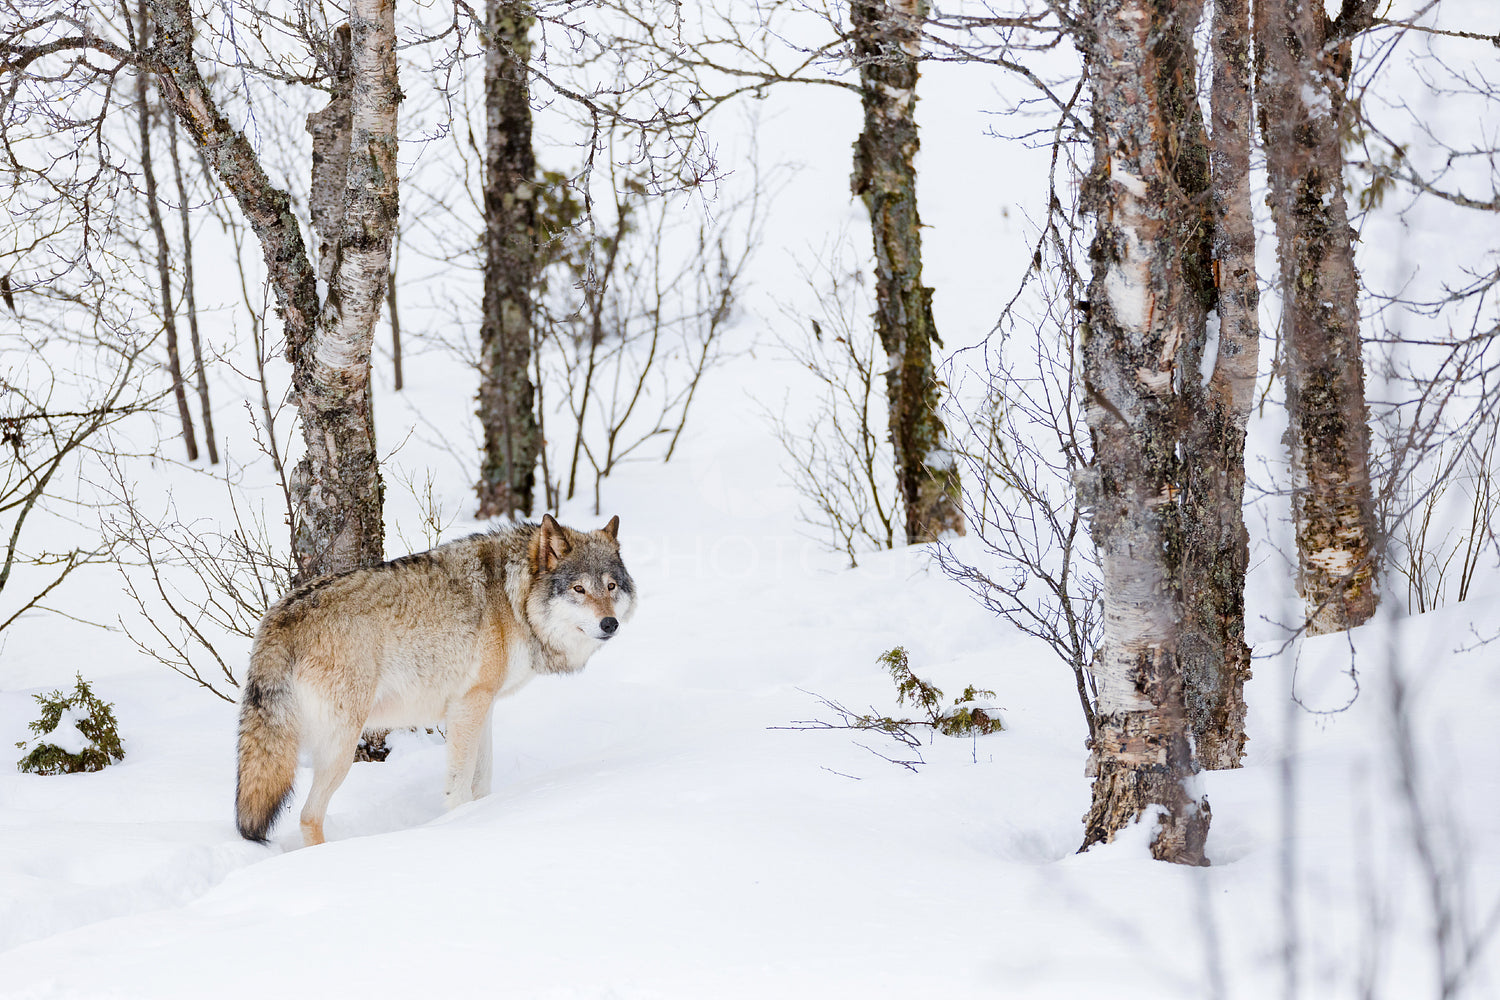 Canis Lupus standing amidst bare trees on snow